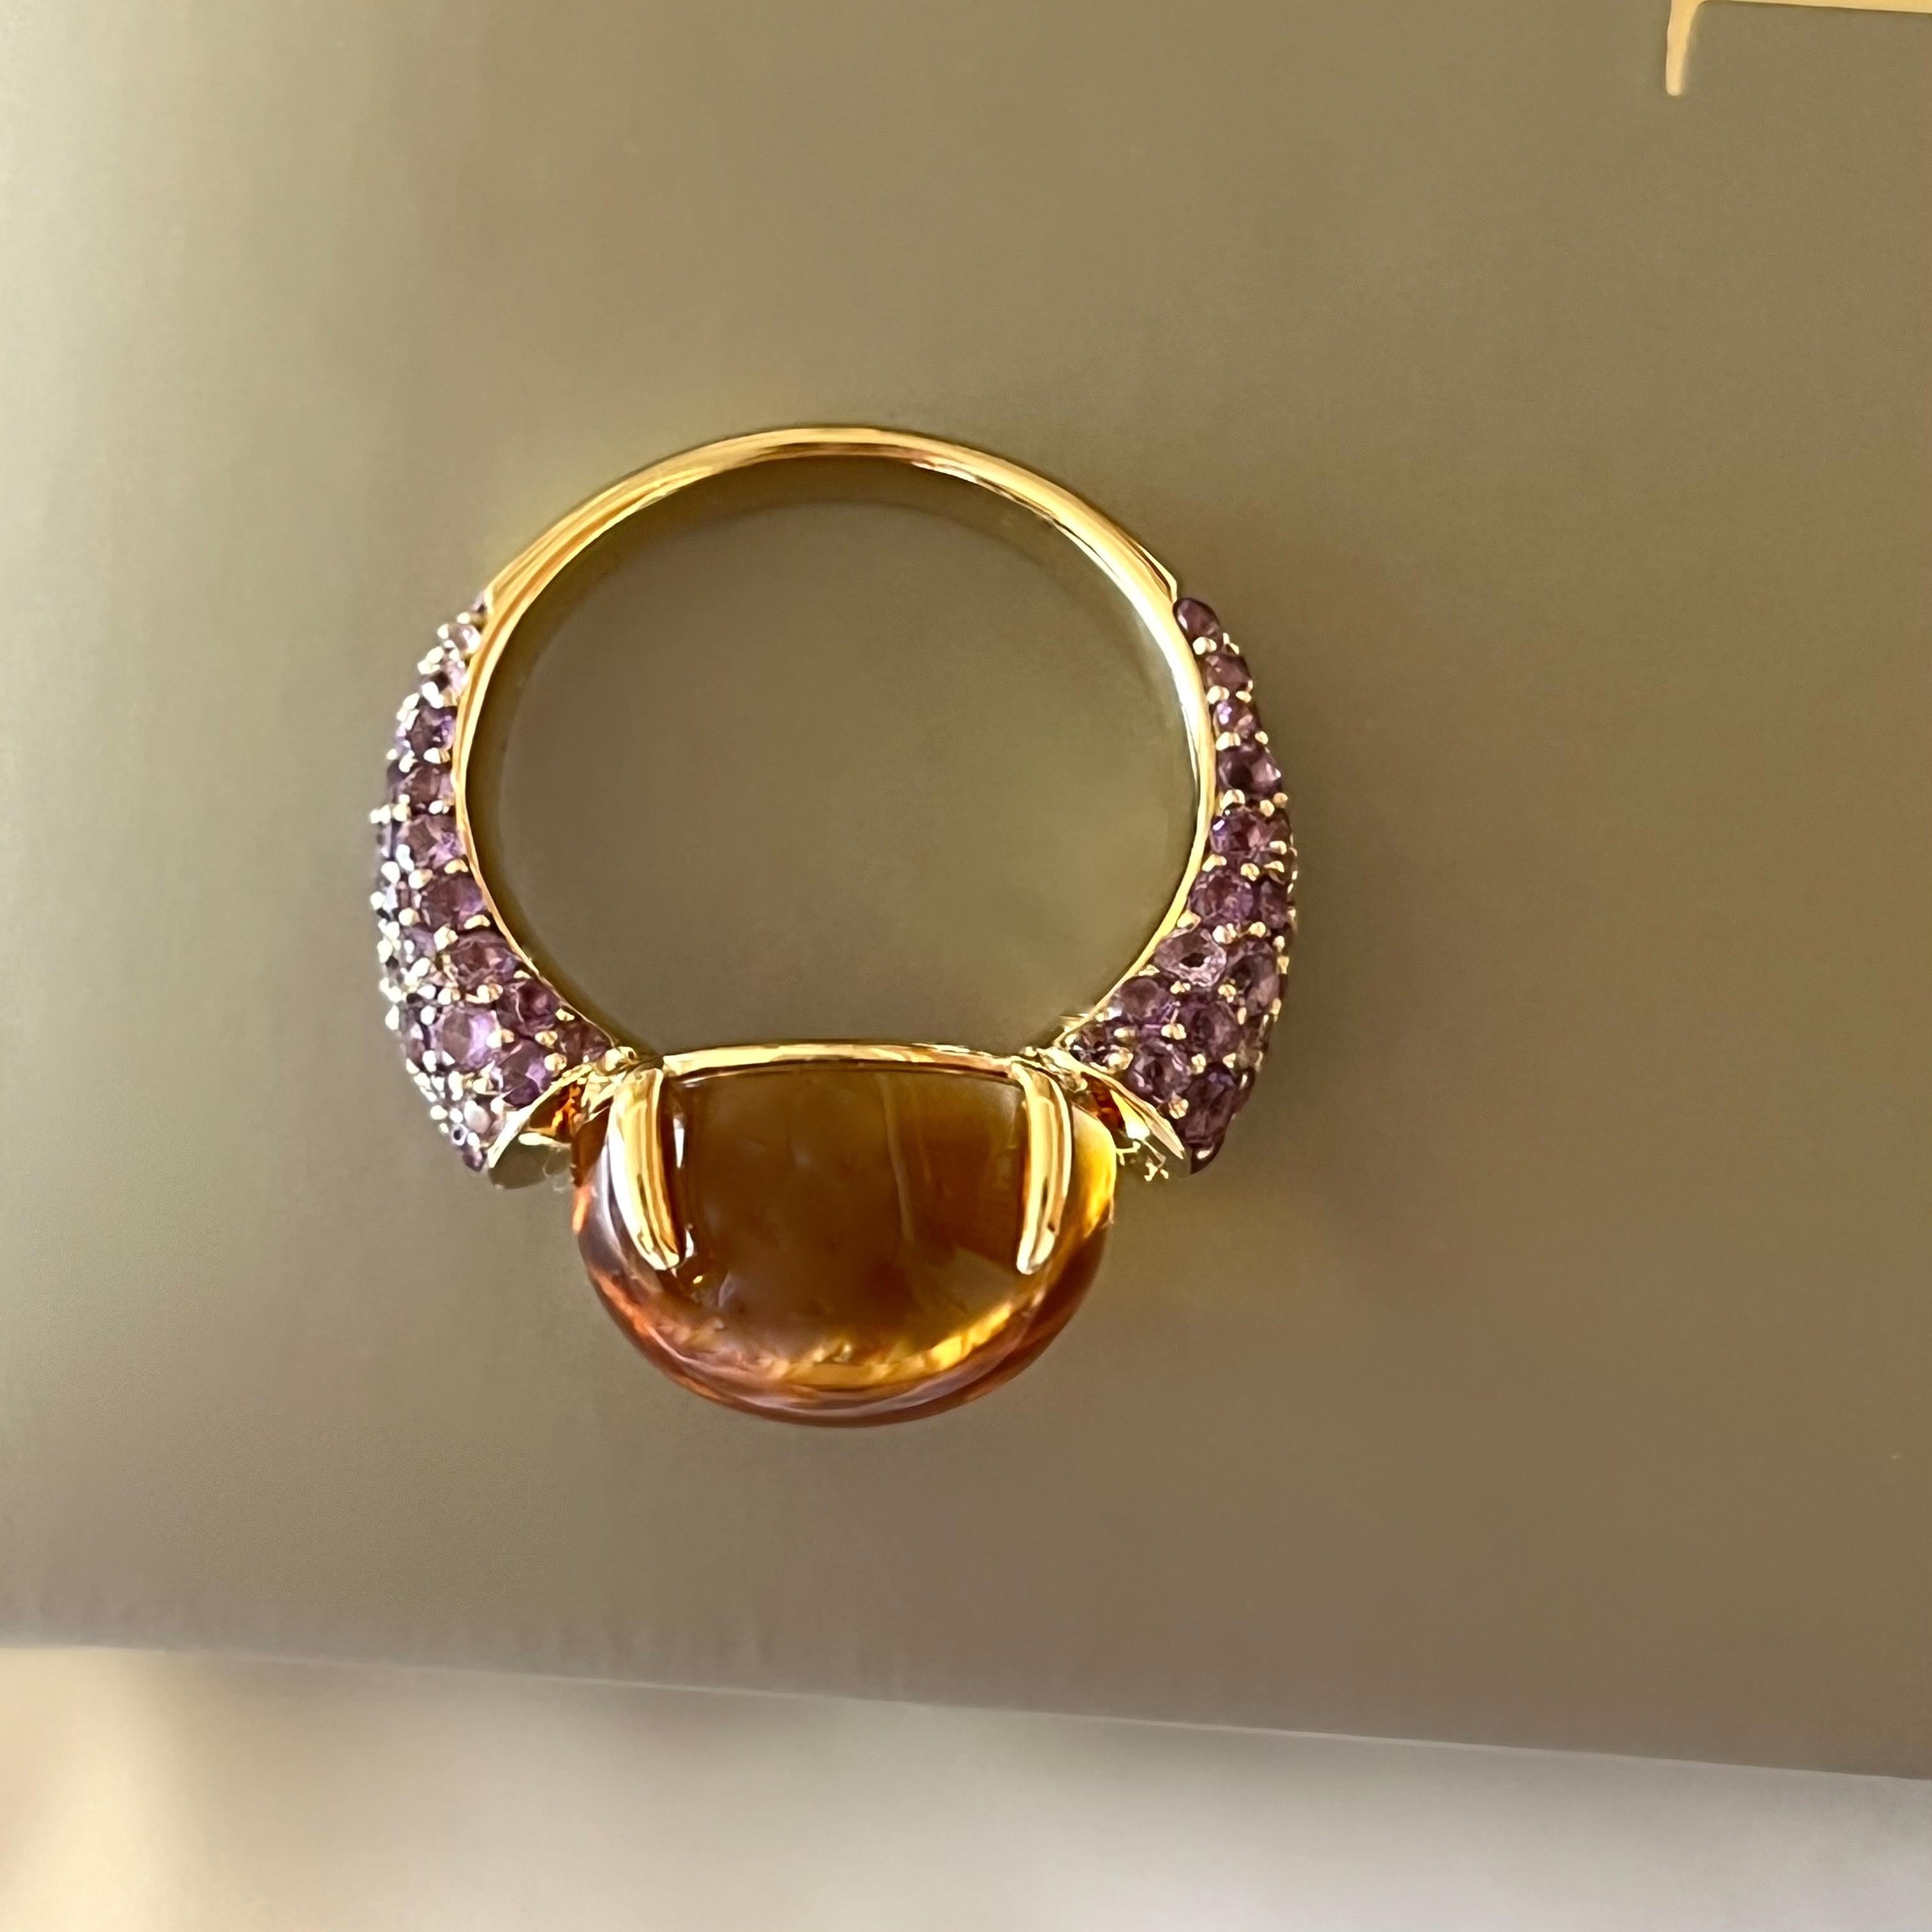 10 Carat Citrine Amethyst Cabochon 18 Karat Yellow Gold Ring by D&A In New Condition For Sale In Singapore, SG